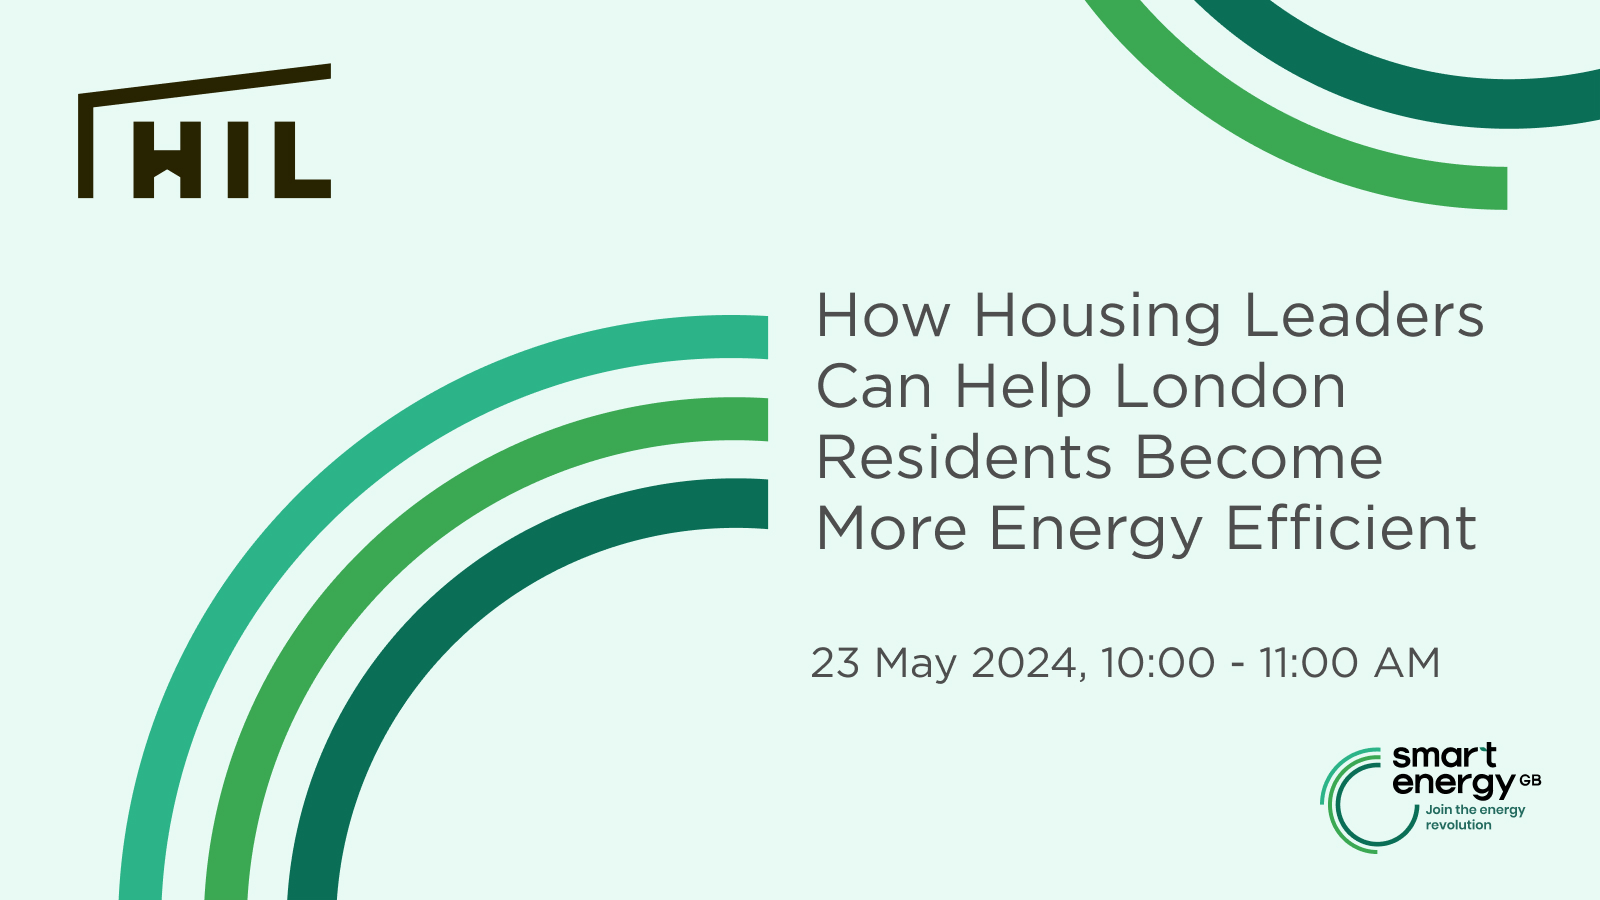 How Housing Leaders Can Help London Resident Become More Energy Efficient